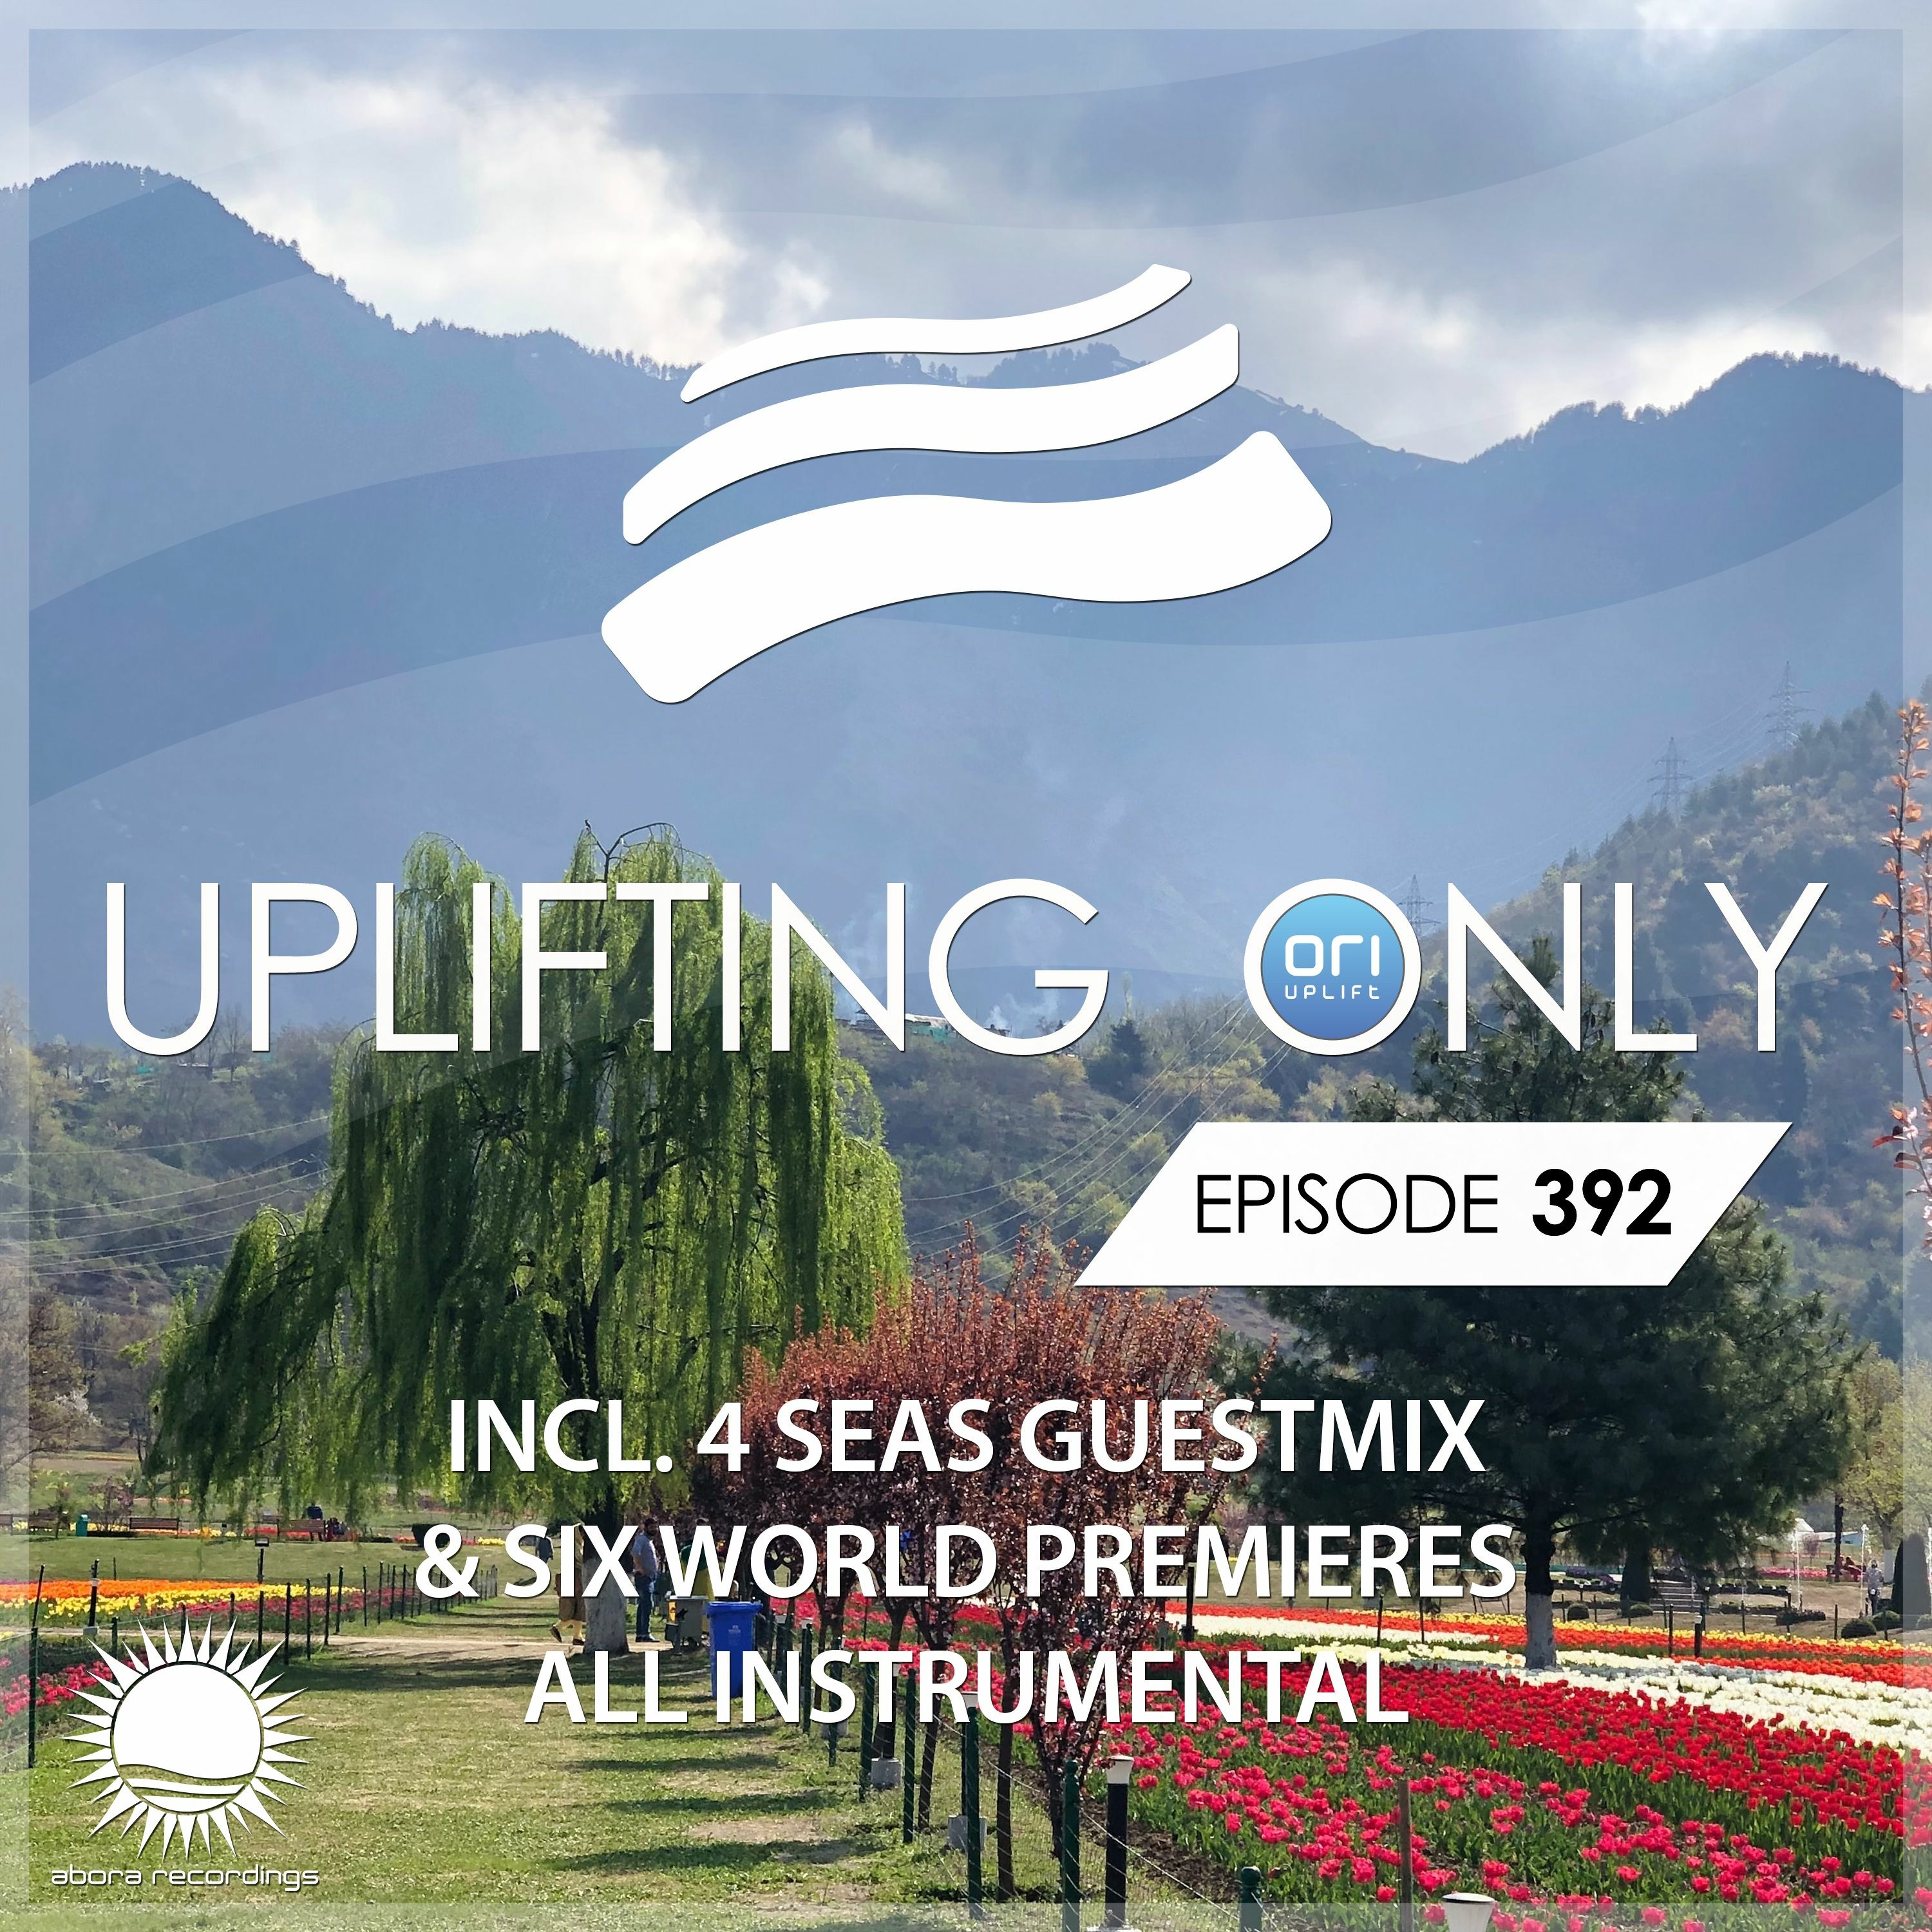 Uplifting Only 392 (Aug 13, 2020) (incl. 4 Seas Guestmix) [All Instrumental]